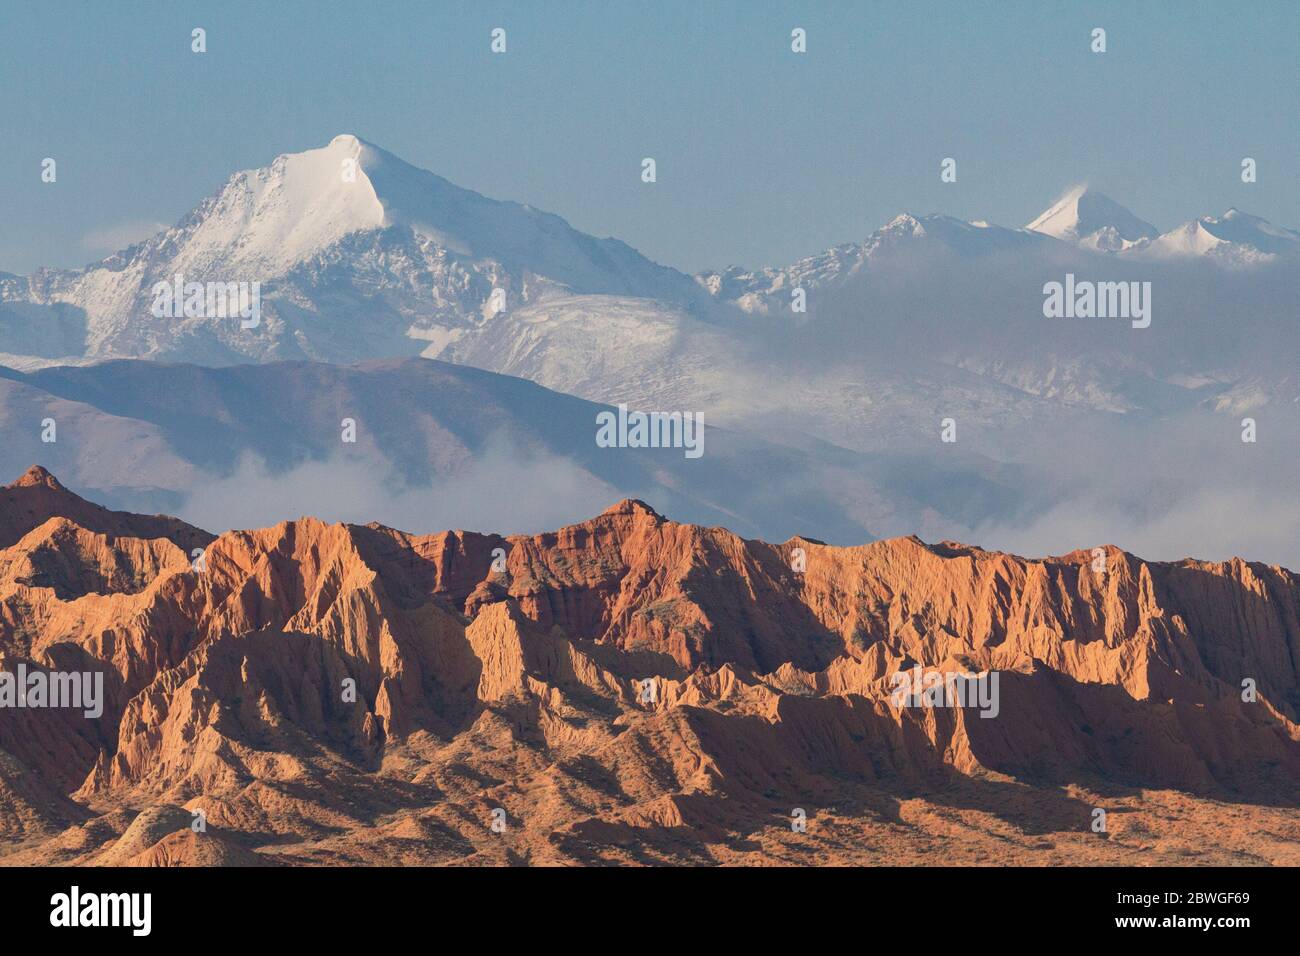 Snow capped mountains and geological formations in the Issyk Kul Lake area, Kyrgyzstan Stock Photo